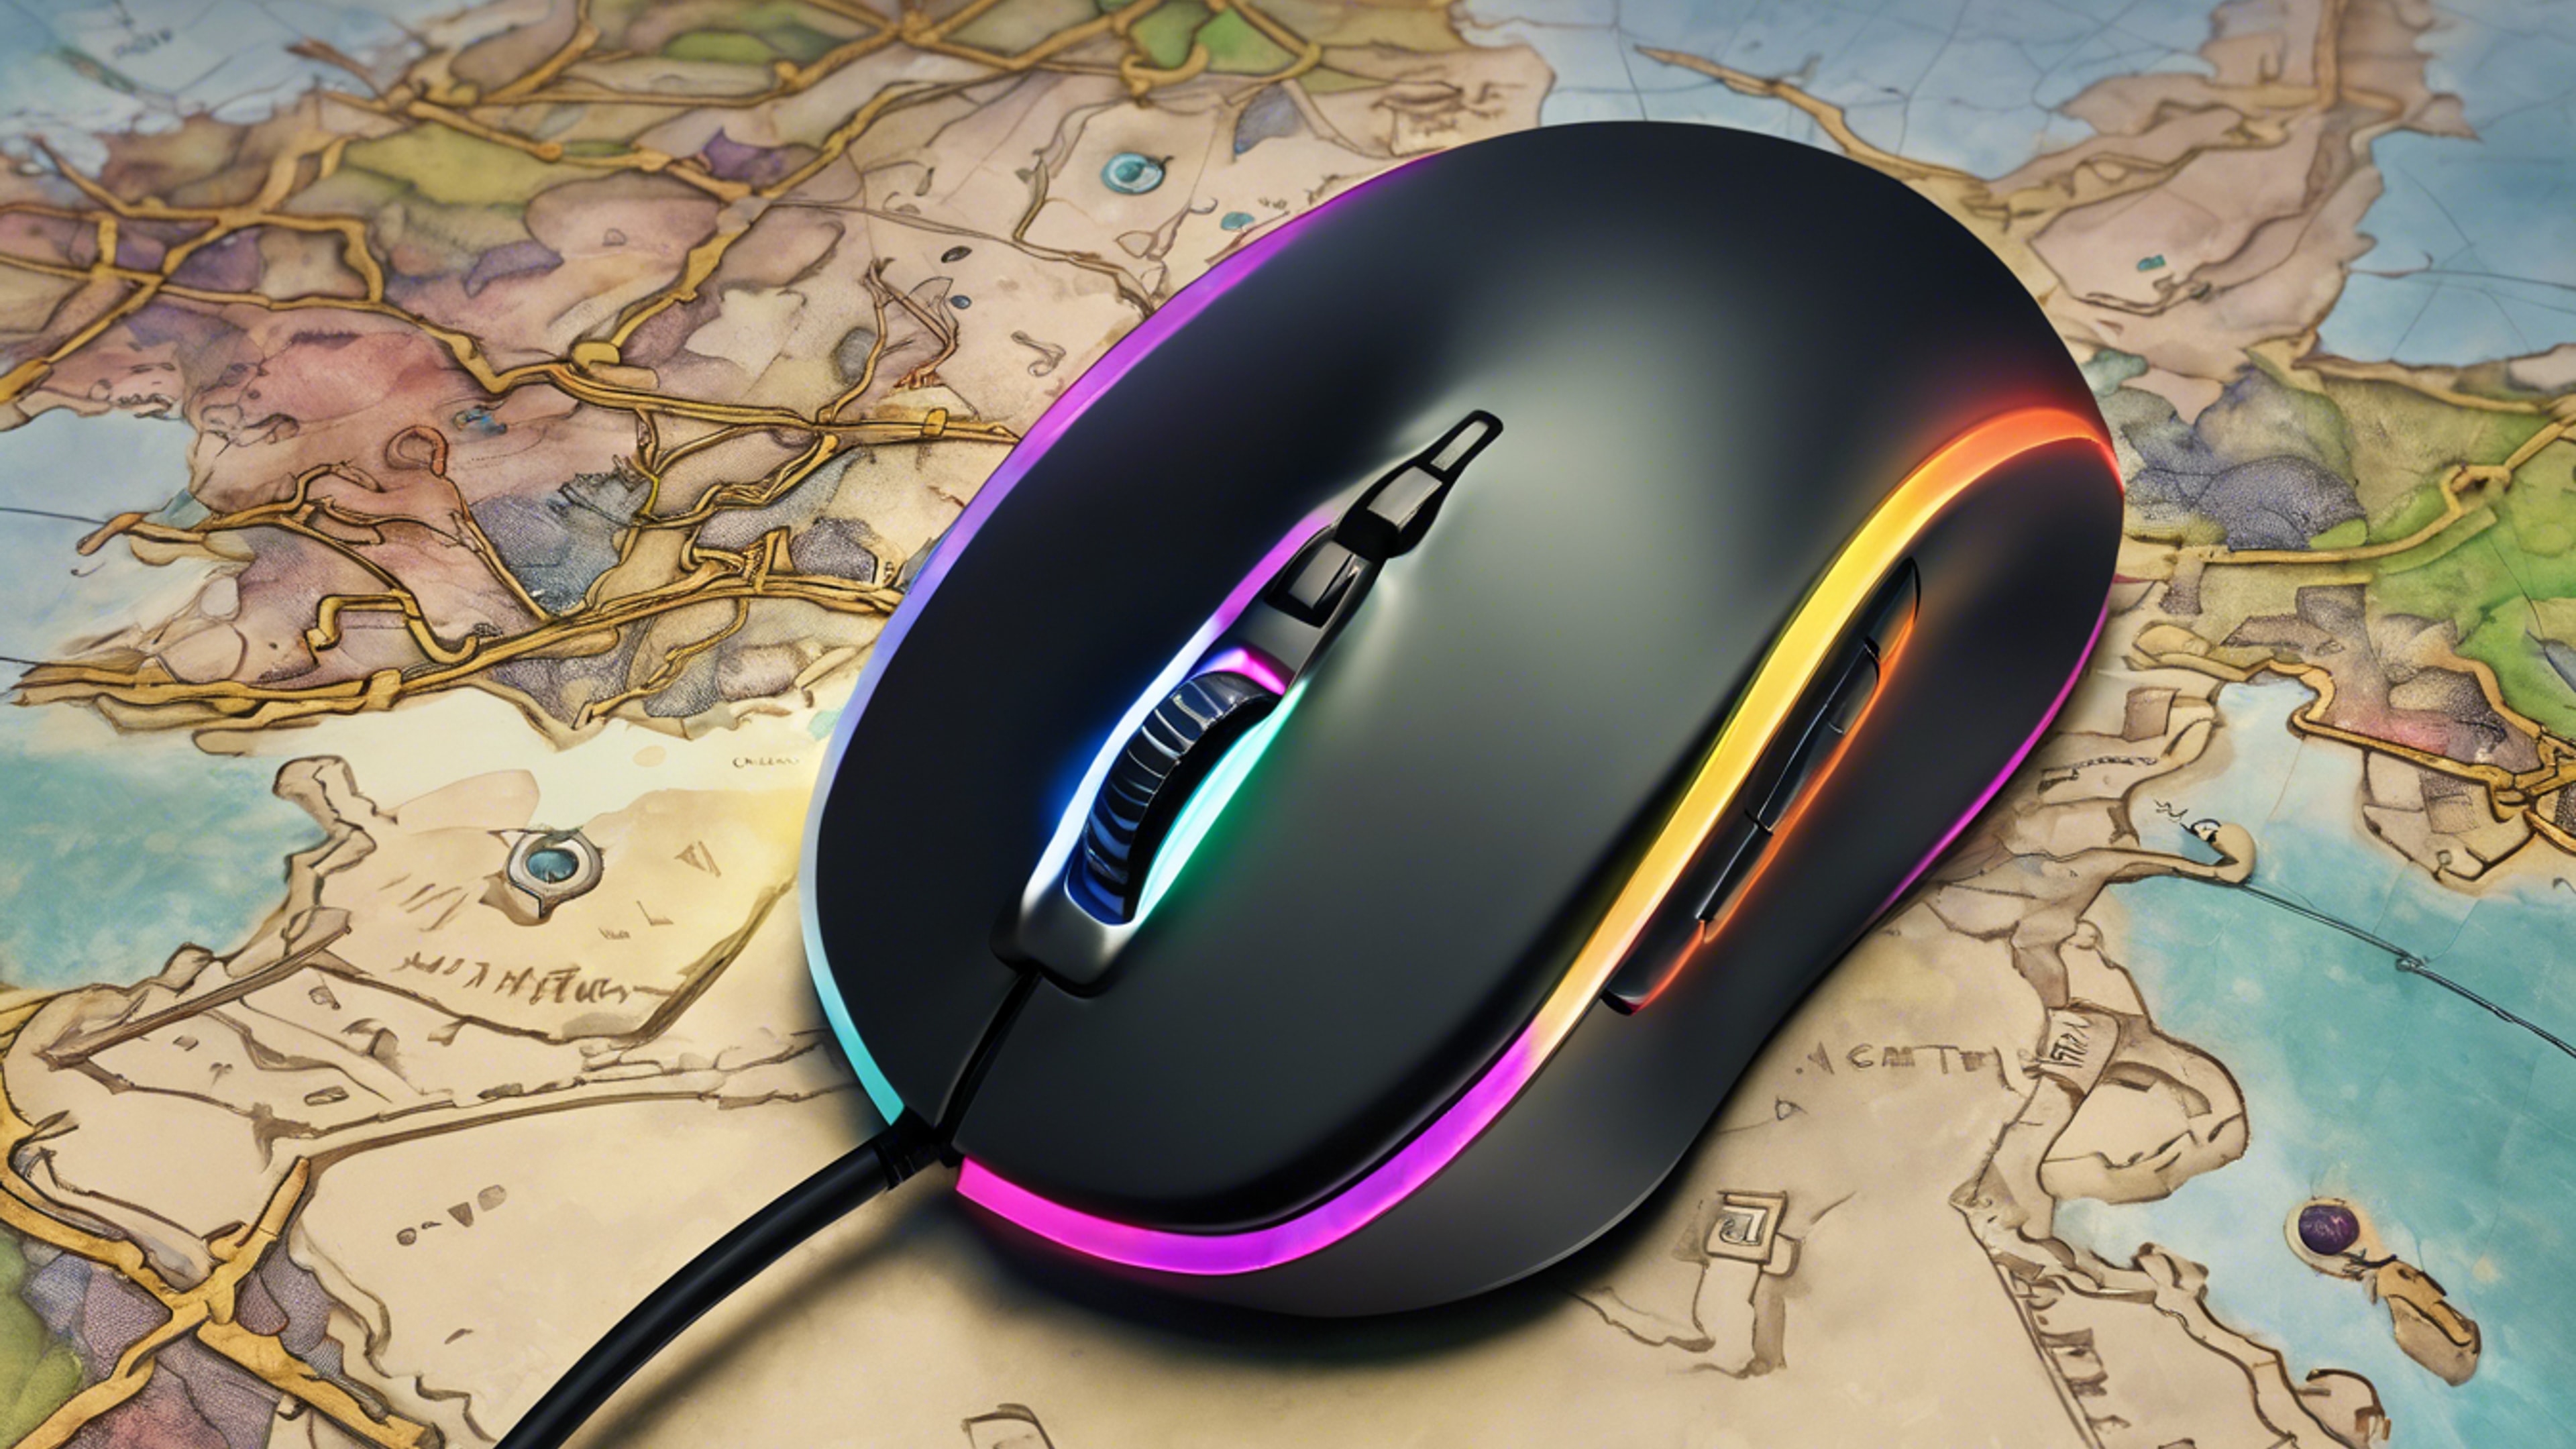 A close up of black gaming mouse with multicoloured lights, placed on a mouse pad with a map of a fantasy world. วอลล์เปเปอร์[91f93c56765f47f0bd9c]